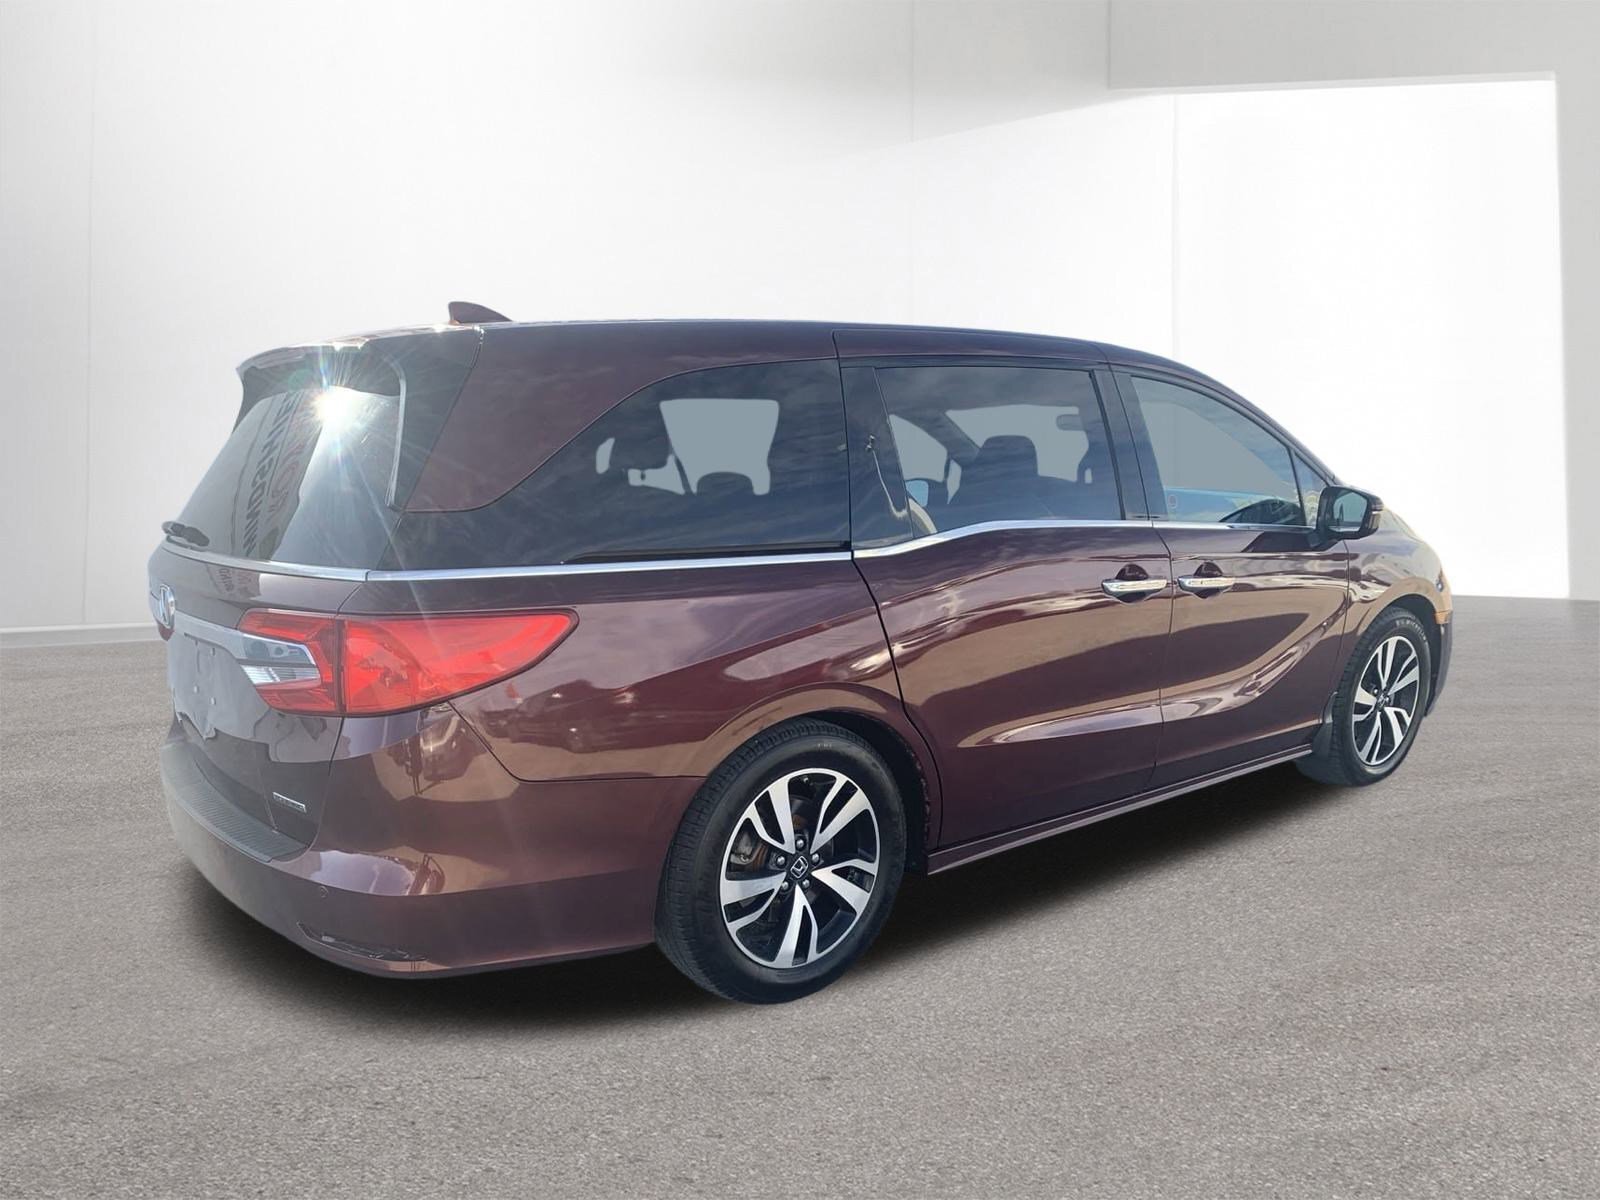 2018 Honda Odyssey Touring - 1 owner and dealer maintained!